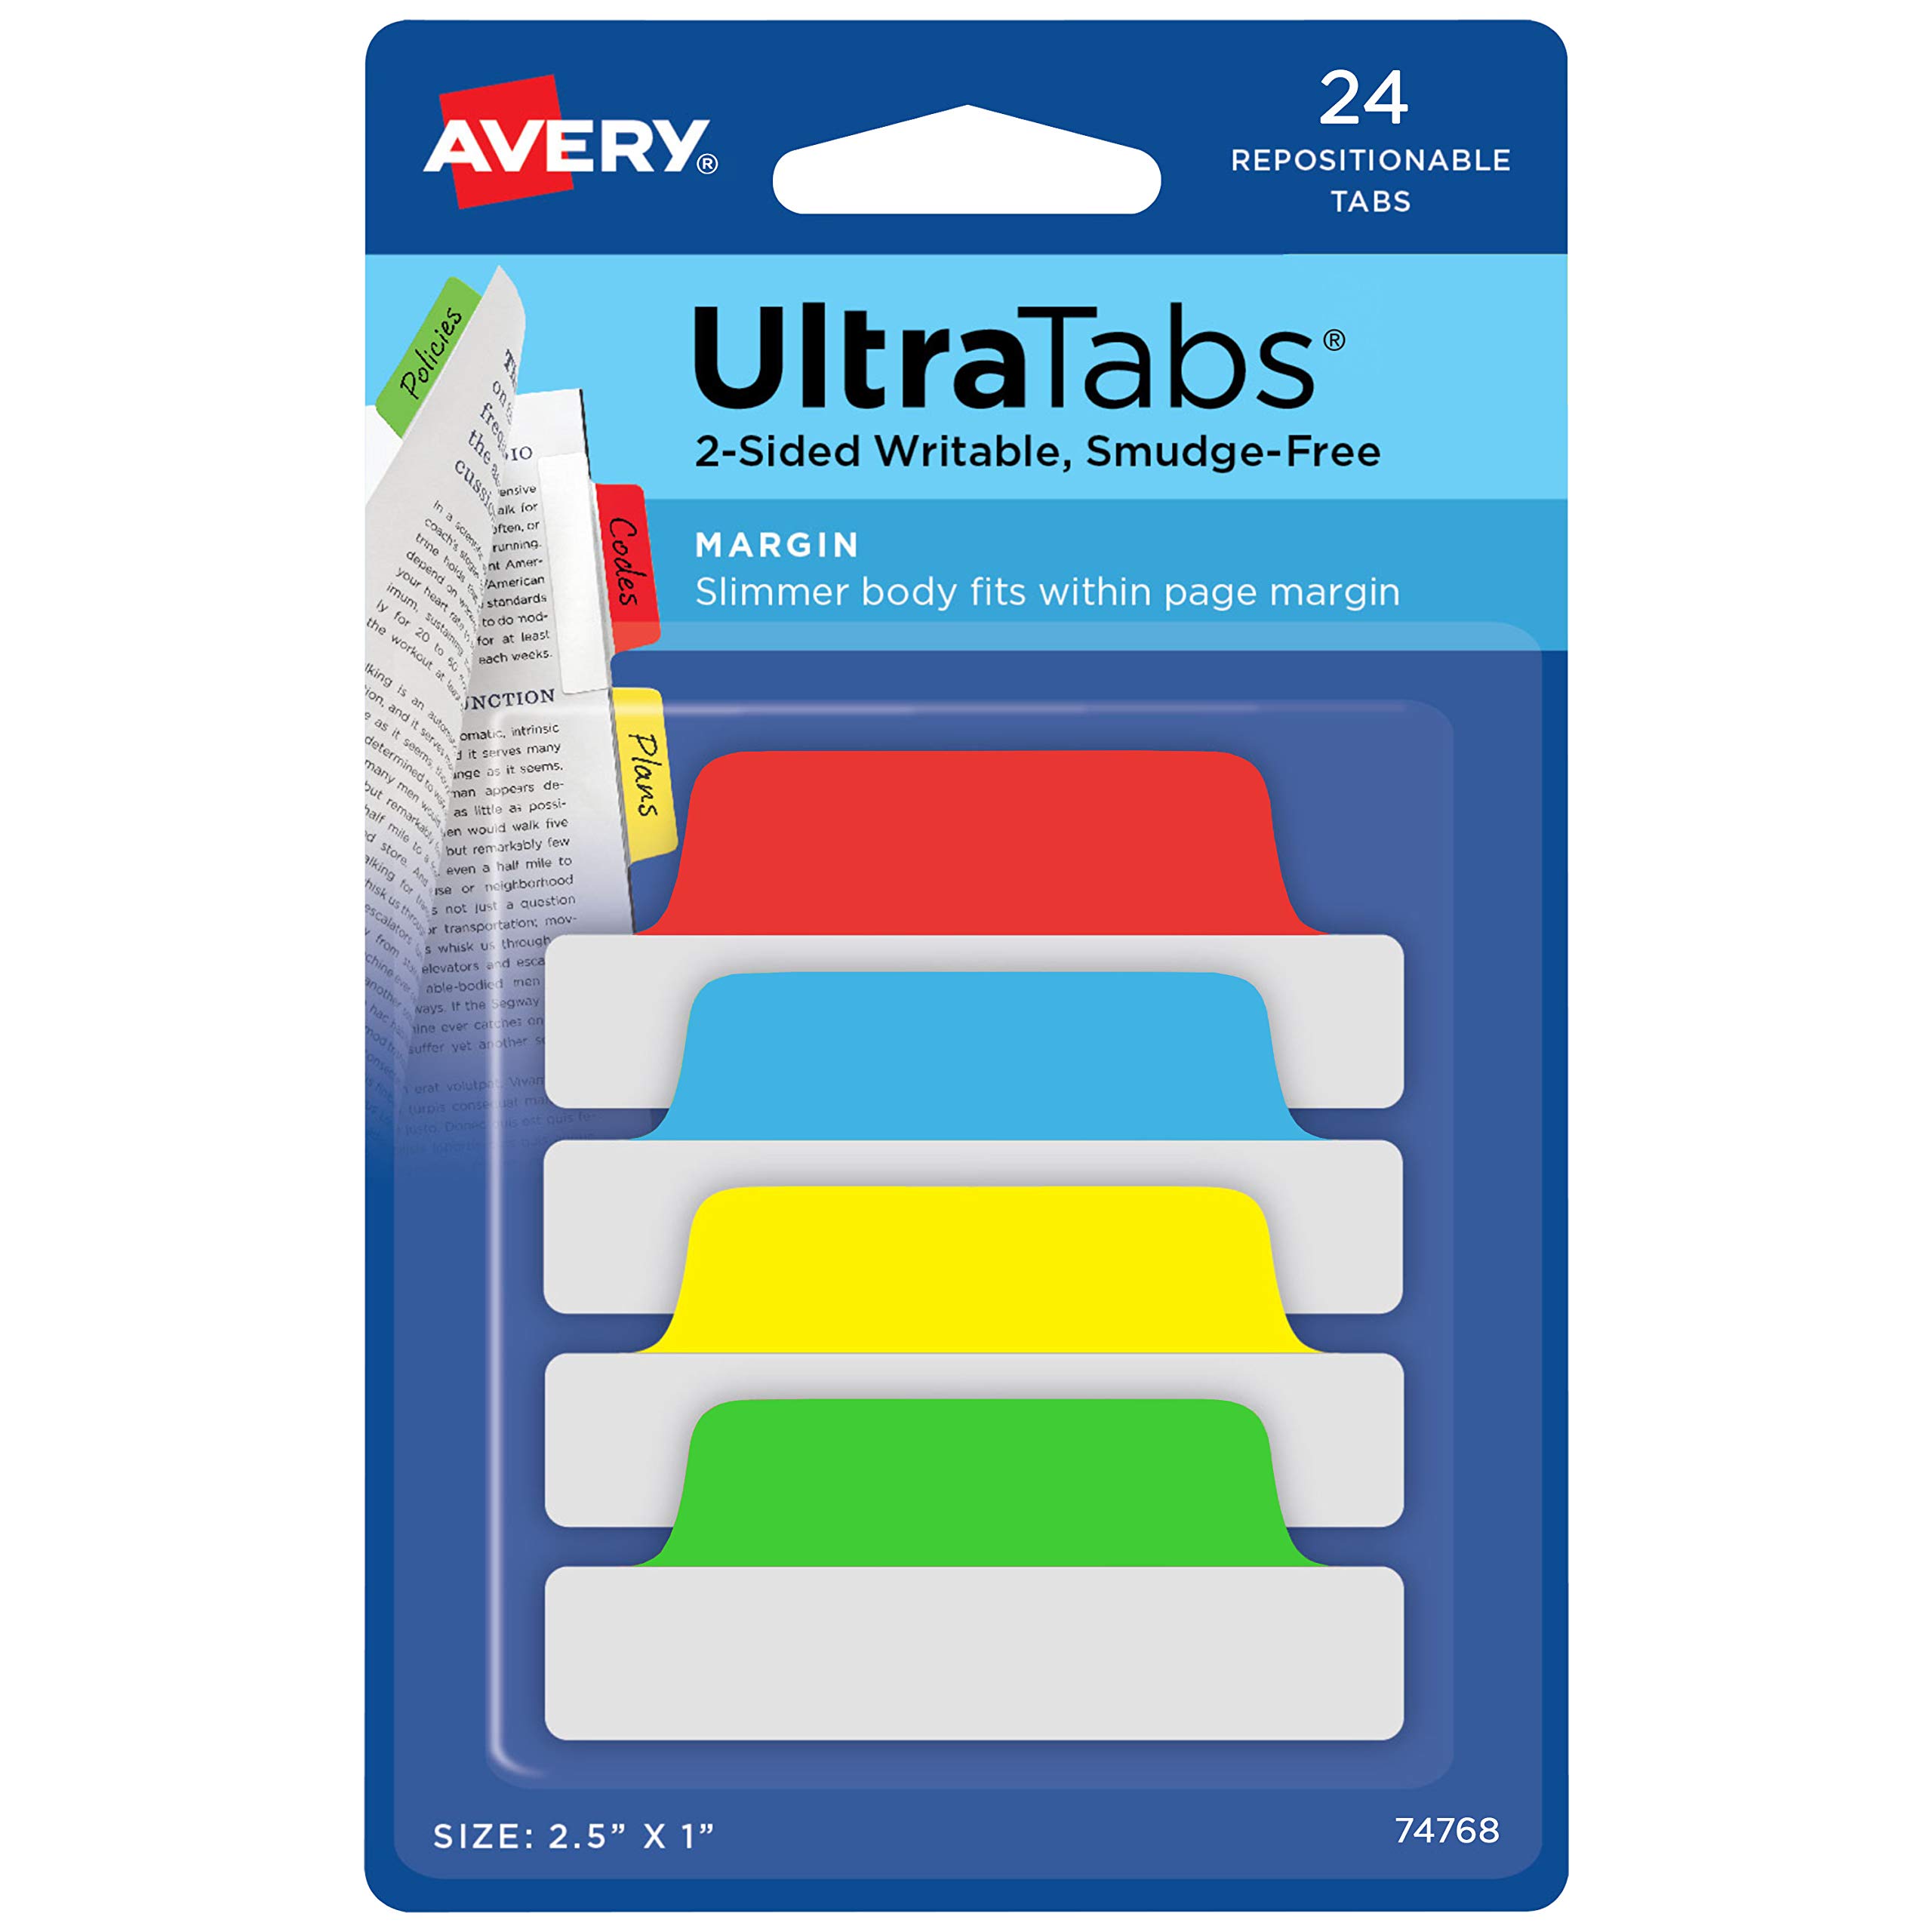 Avery Margin Ultra Side Writable Assorted Colors 24 Repositionable Page 25